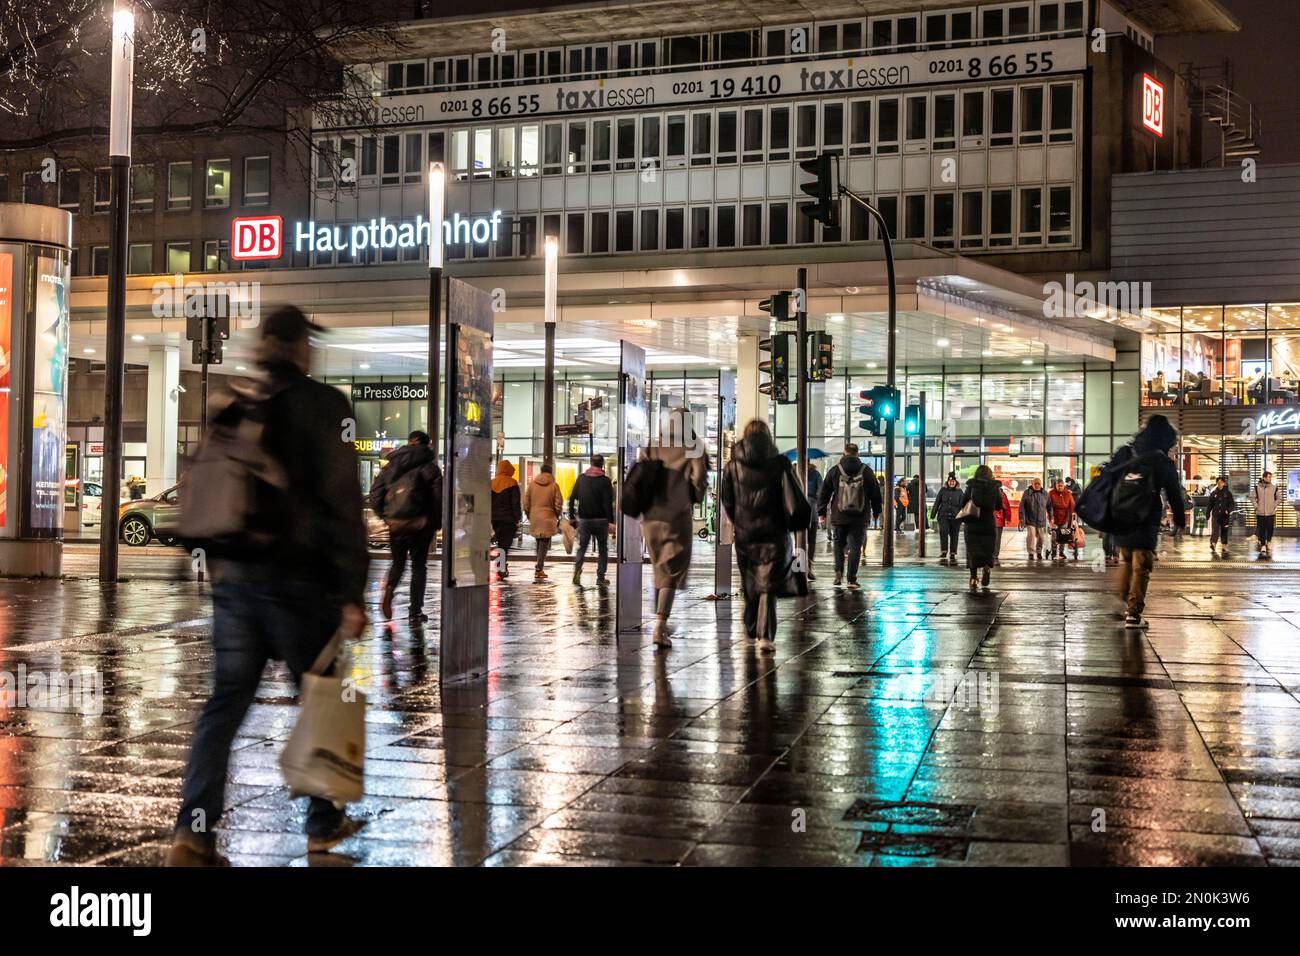 Passers-by at a pedestrian crossing, at the main station, rainy weather, city centre, in the evening, Essen, NRW, Germany, Stock Photo